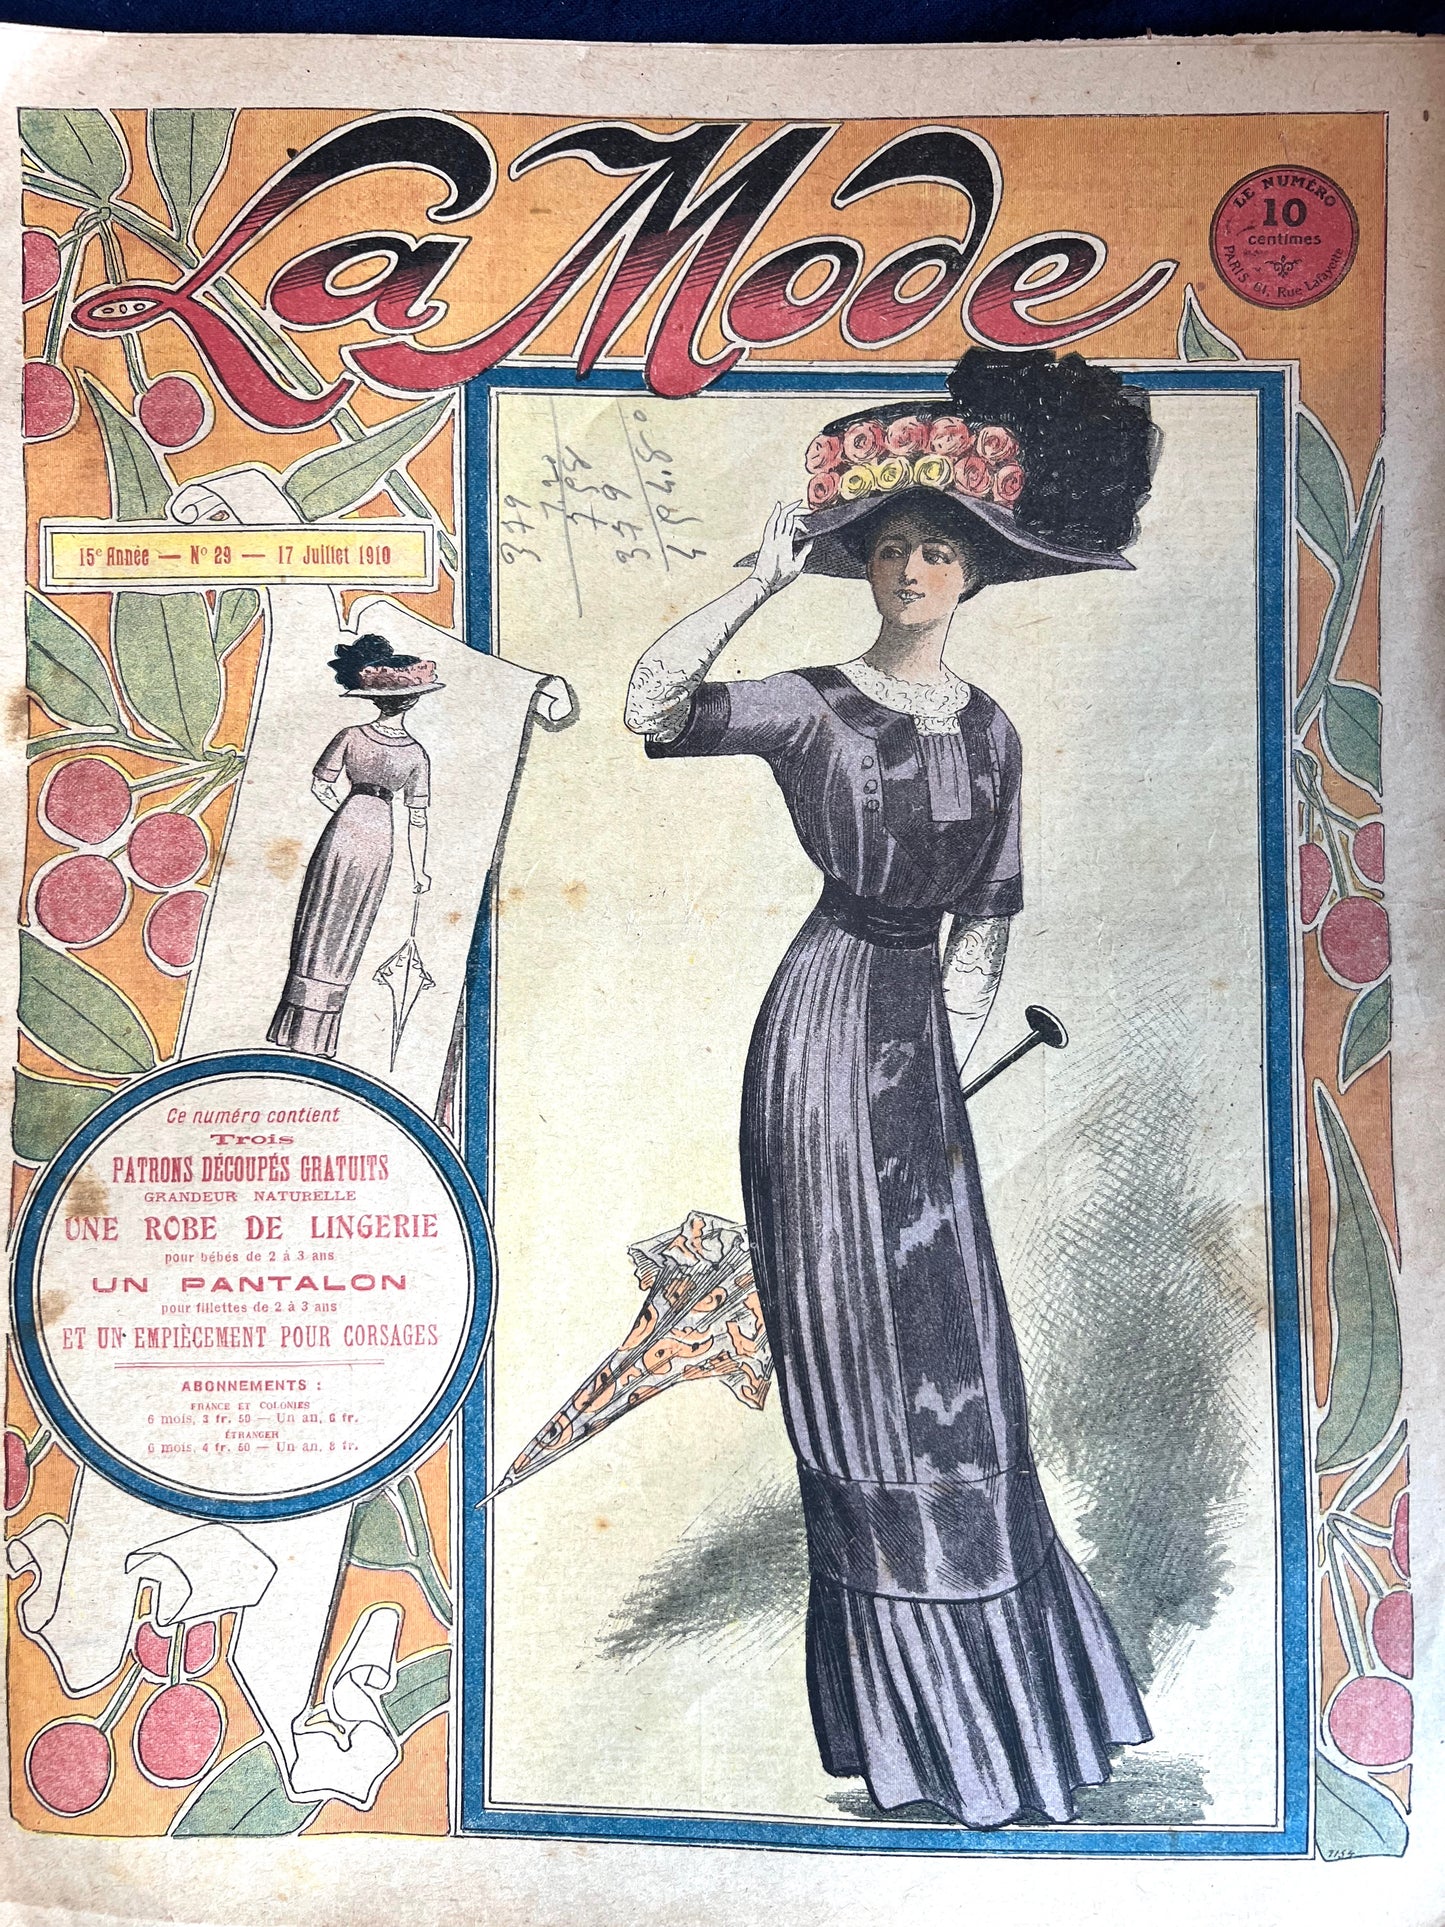 Glorious Fashions from 114 years ago - July 1910 French Fashion Paper La Mode